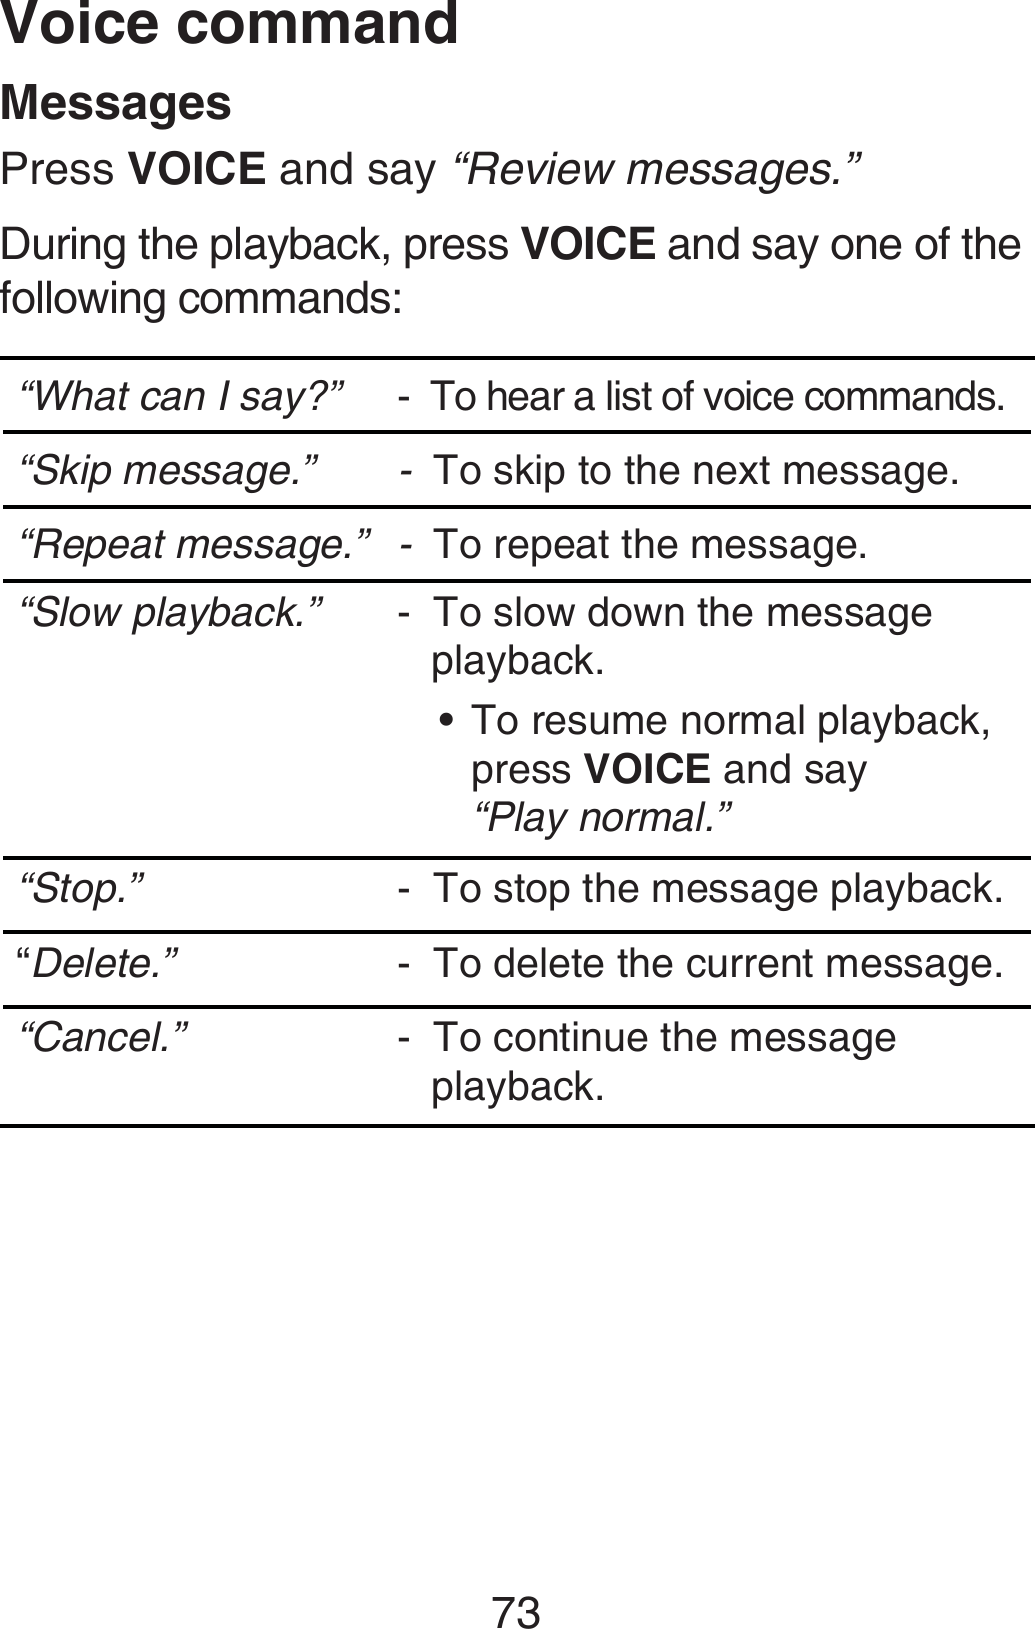 73Voice commandMessagesPress VOICE and say “Review messages.”During the playback, press VOICE and say one of the following commands:“What can I say?” -  To hear a list of voice commands.“Skip message.” -  To skip to the next message.“Repeat message.” -  To repeat the message.“Slow playback.” -  To slow down the message    playback.To resume normal playback, press VOICE and say  “Play normal.”•“Stop.” -  To stop the message playback.“Delete.” -  To delete the current message.“Cancel.” -  To continue the message    playback.